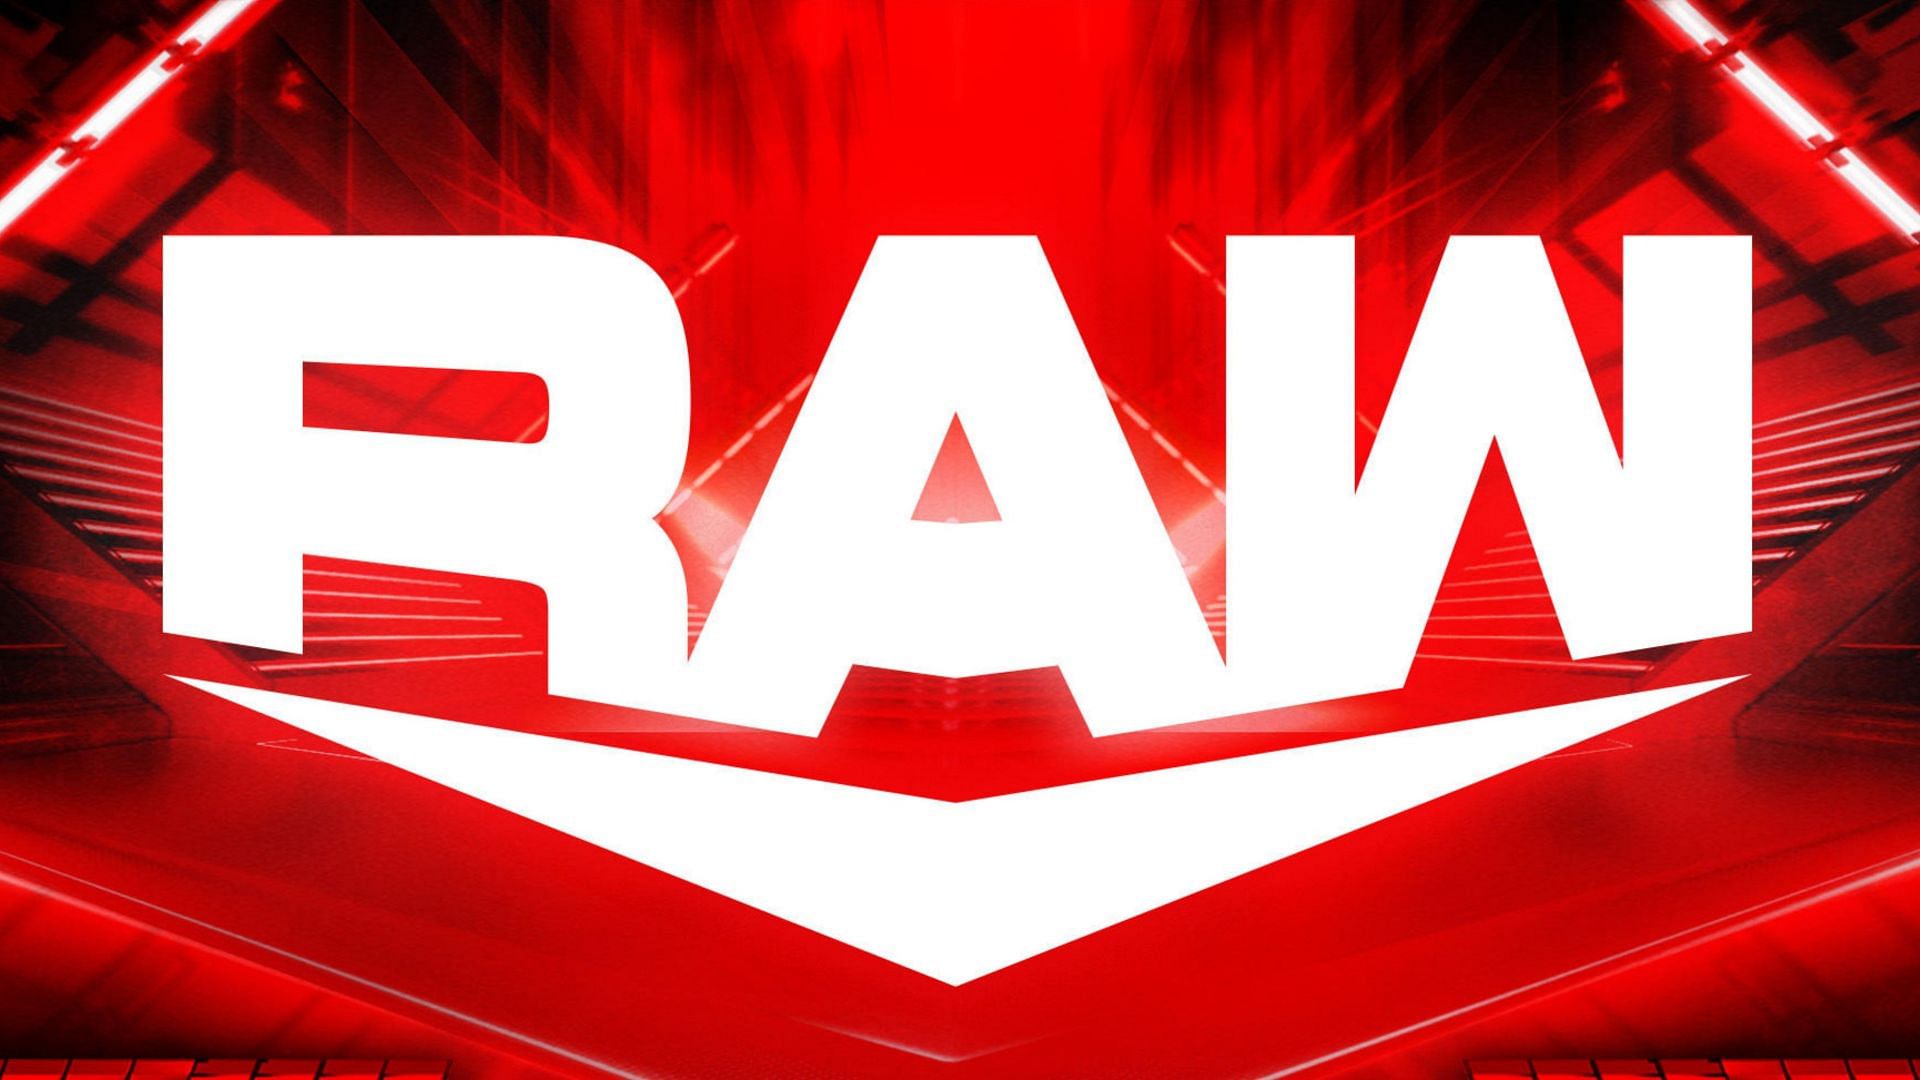 Damage CTRL is currently active on WWE Monday Night RAW